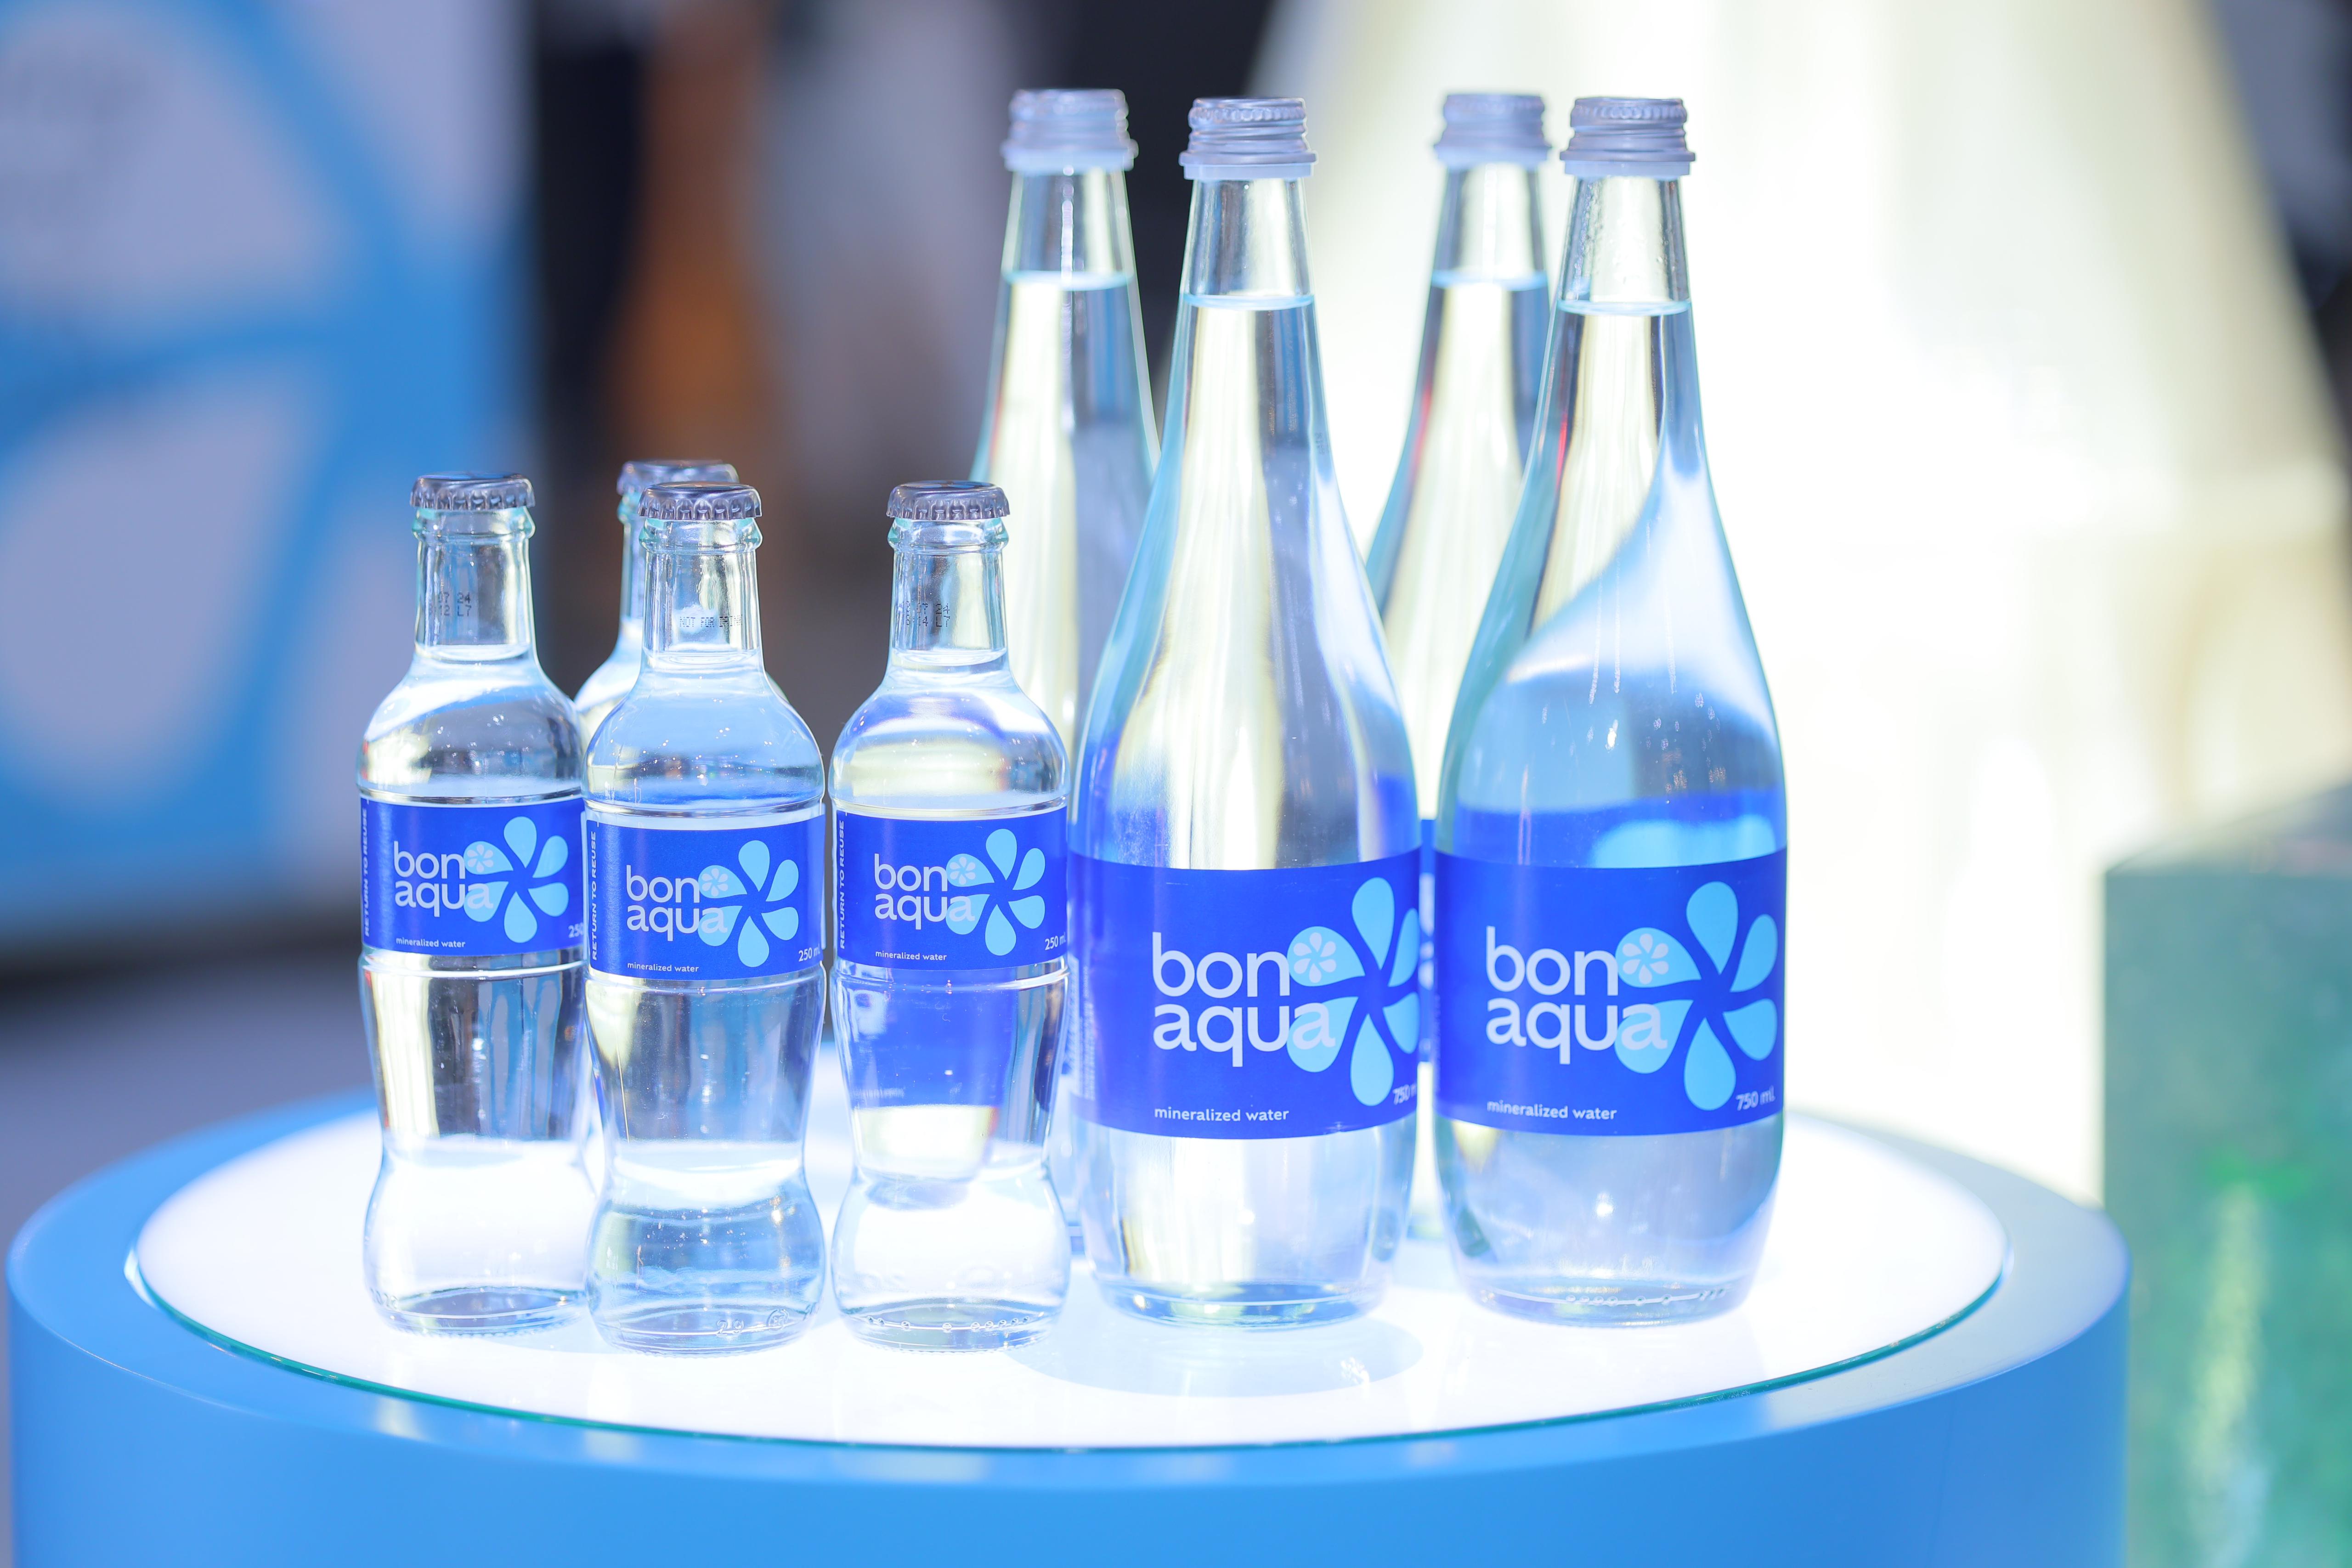 Bonaqua® believes that the introduction of RGB to the hospitality and B2B industries will drive corporate commitment to sustainability. At the same time, by encouraging guests and employees to use these eco-friendly alternatives and get into the habit of recycling, this campaign can raise public awareness around environmental protection and inspire them to adopt sustainable lifestyles.